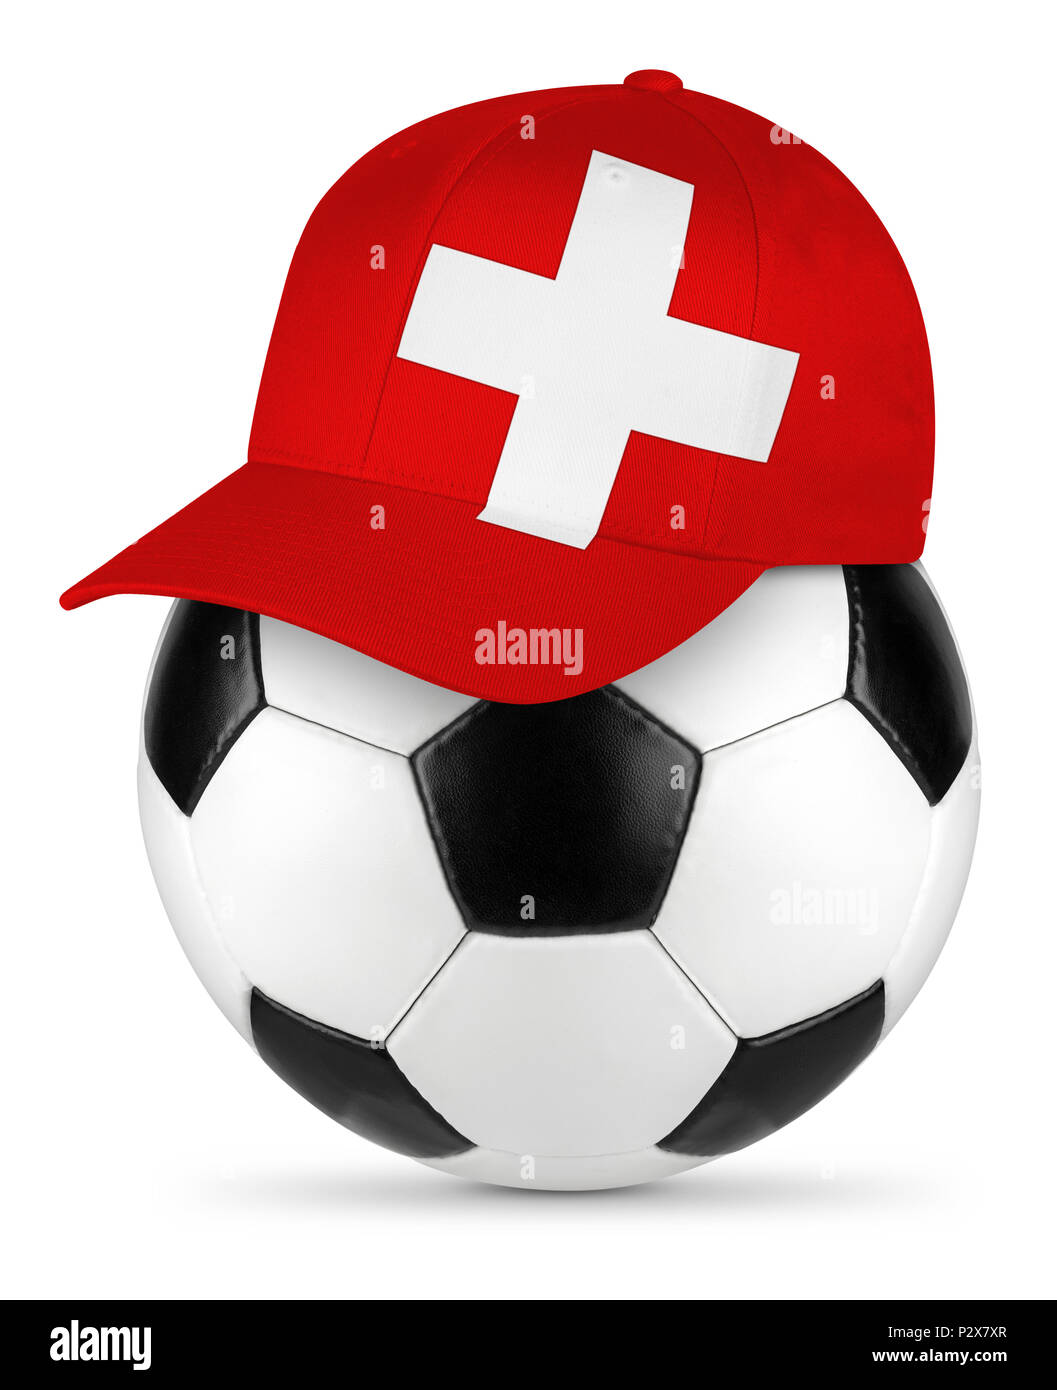 Classic black white leather soccer ball with swiss baseball fan cap isolated background sport football concept Stock Photo